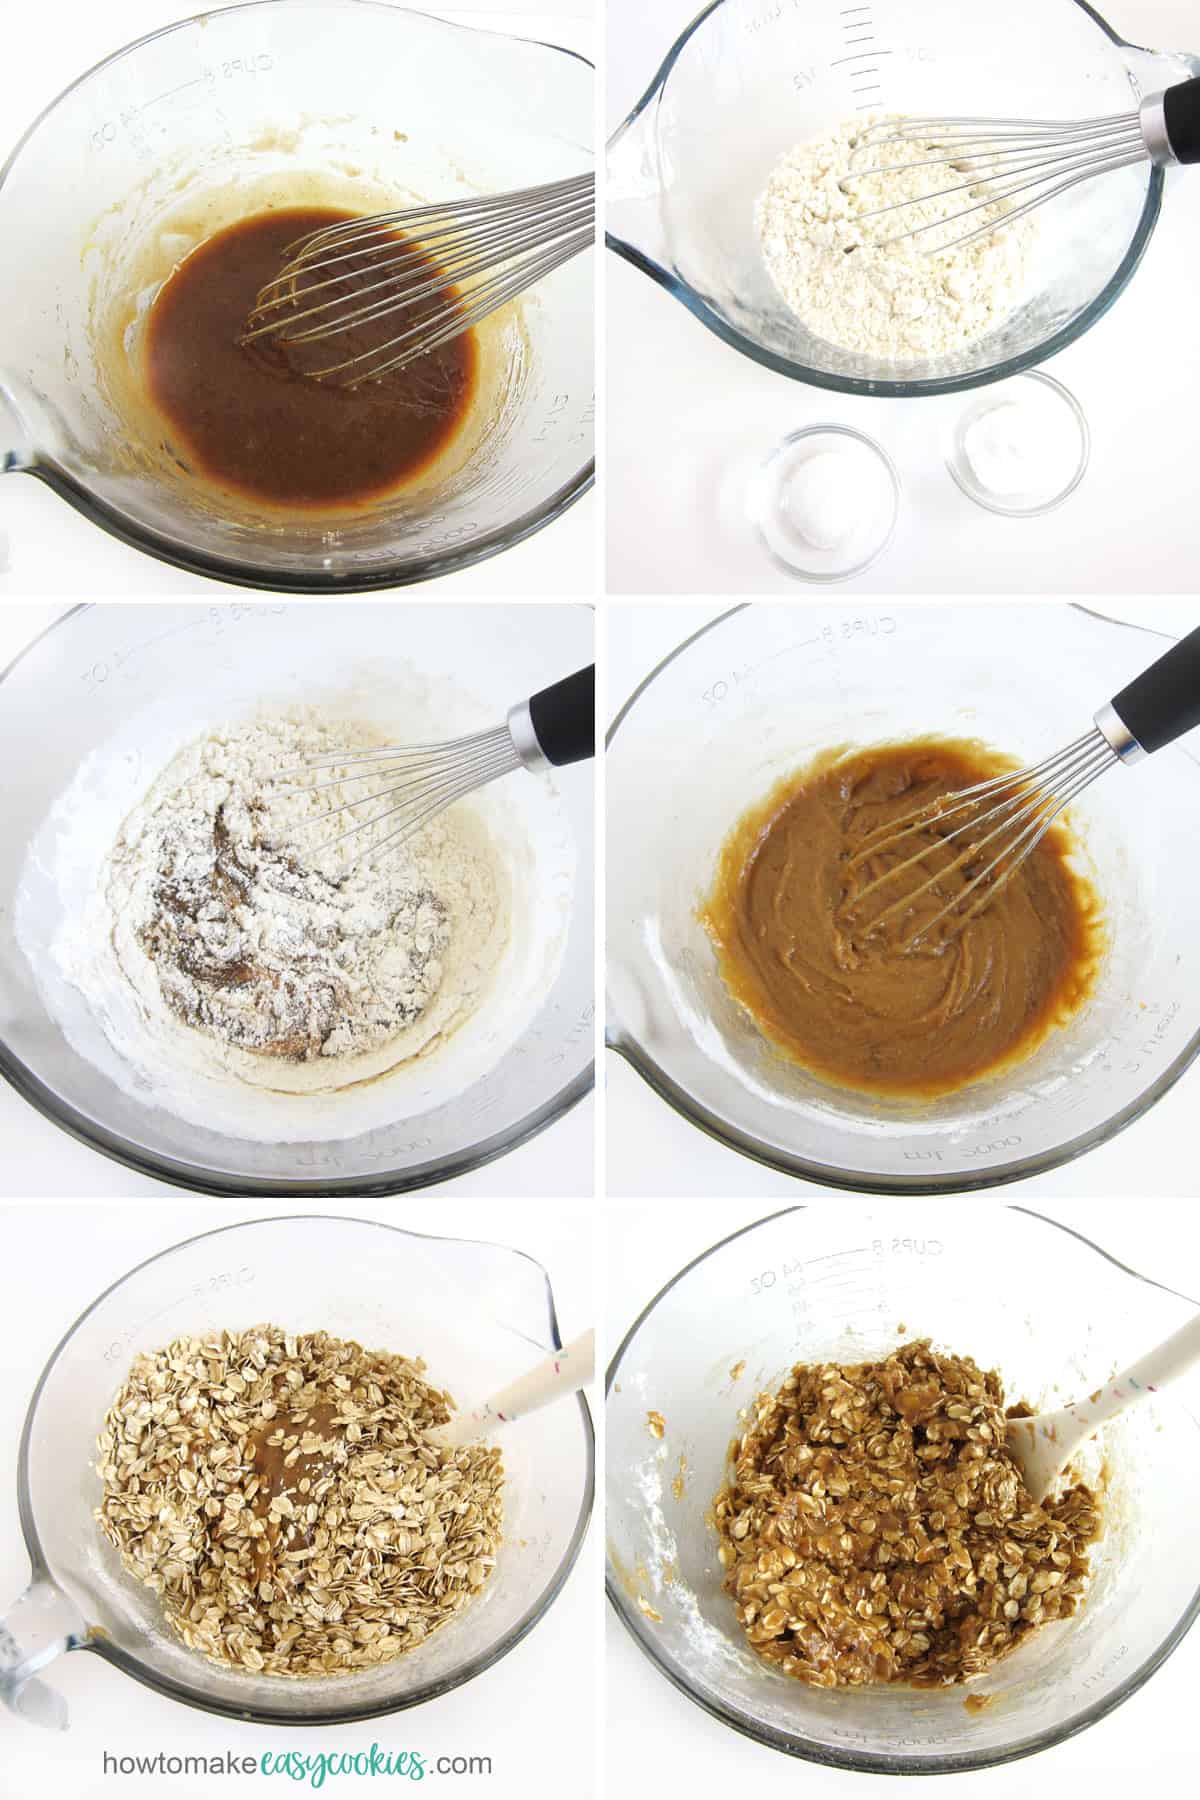 Make oatmeal cookie dough by mixing flour, baking soda, salt, and oats, into the wet ingredients.